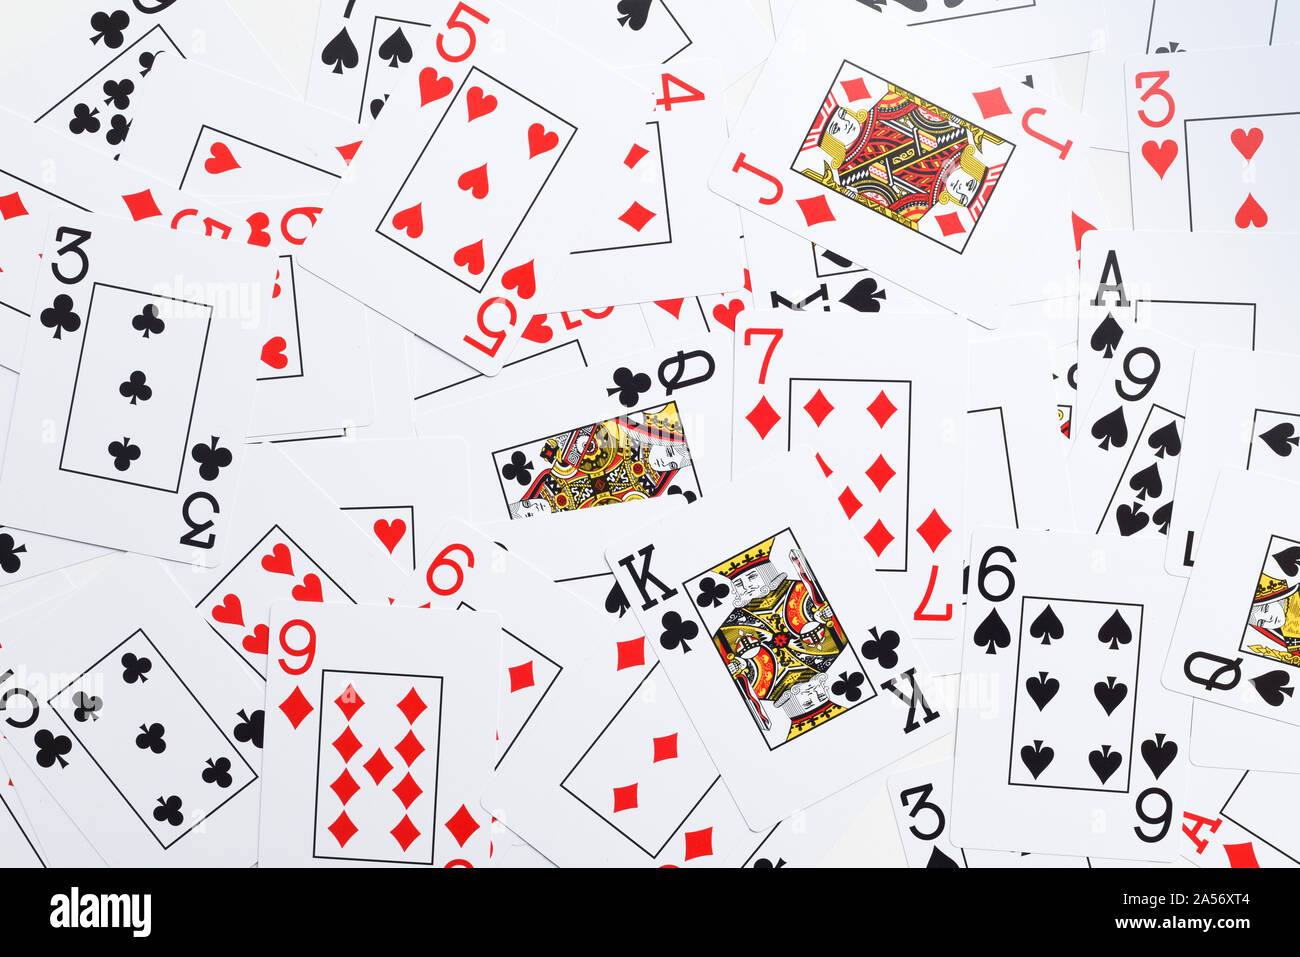 Deck of playing cards shuffled at random shot from directly above Stock Photo